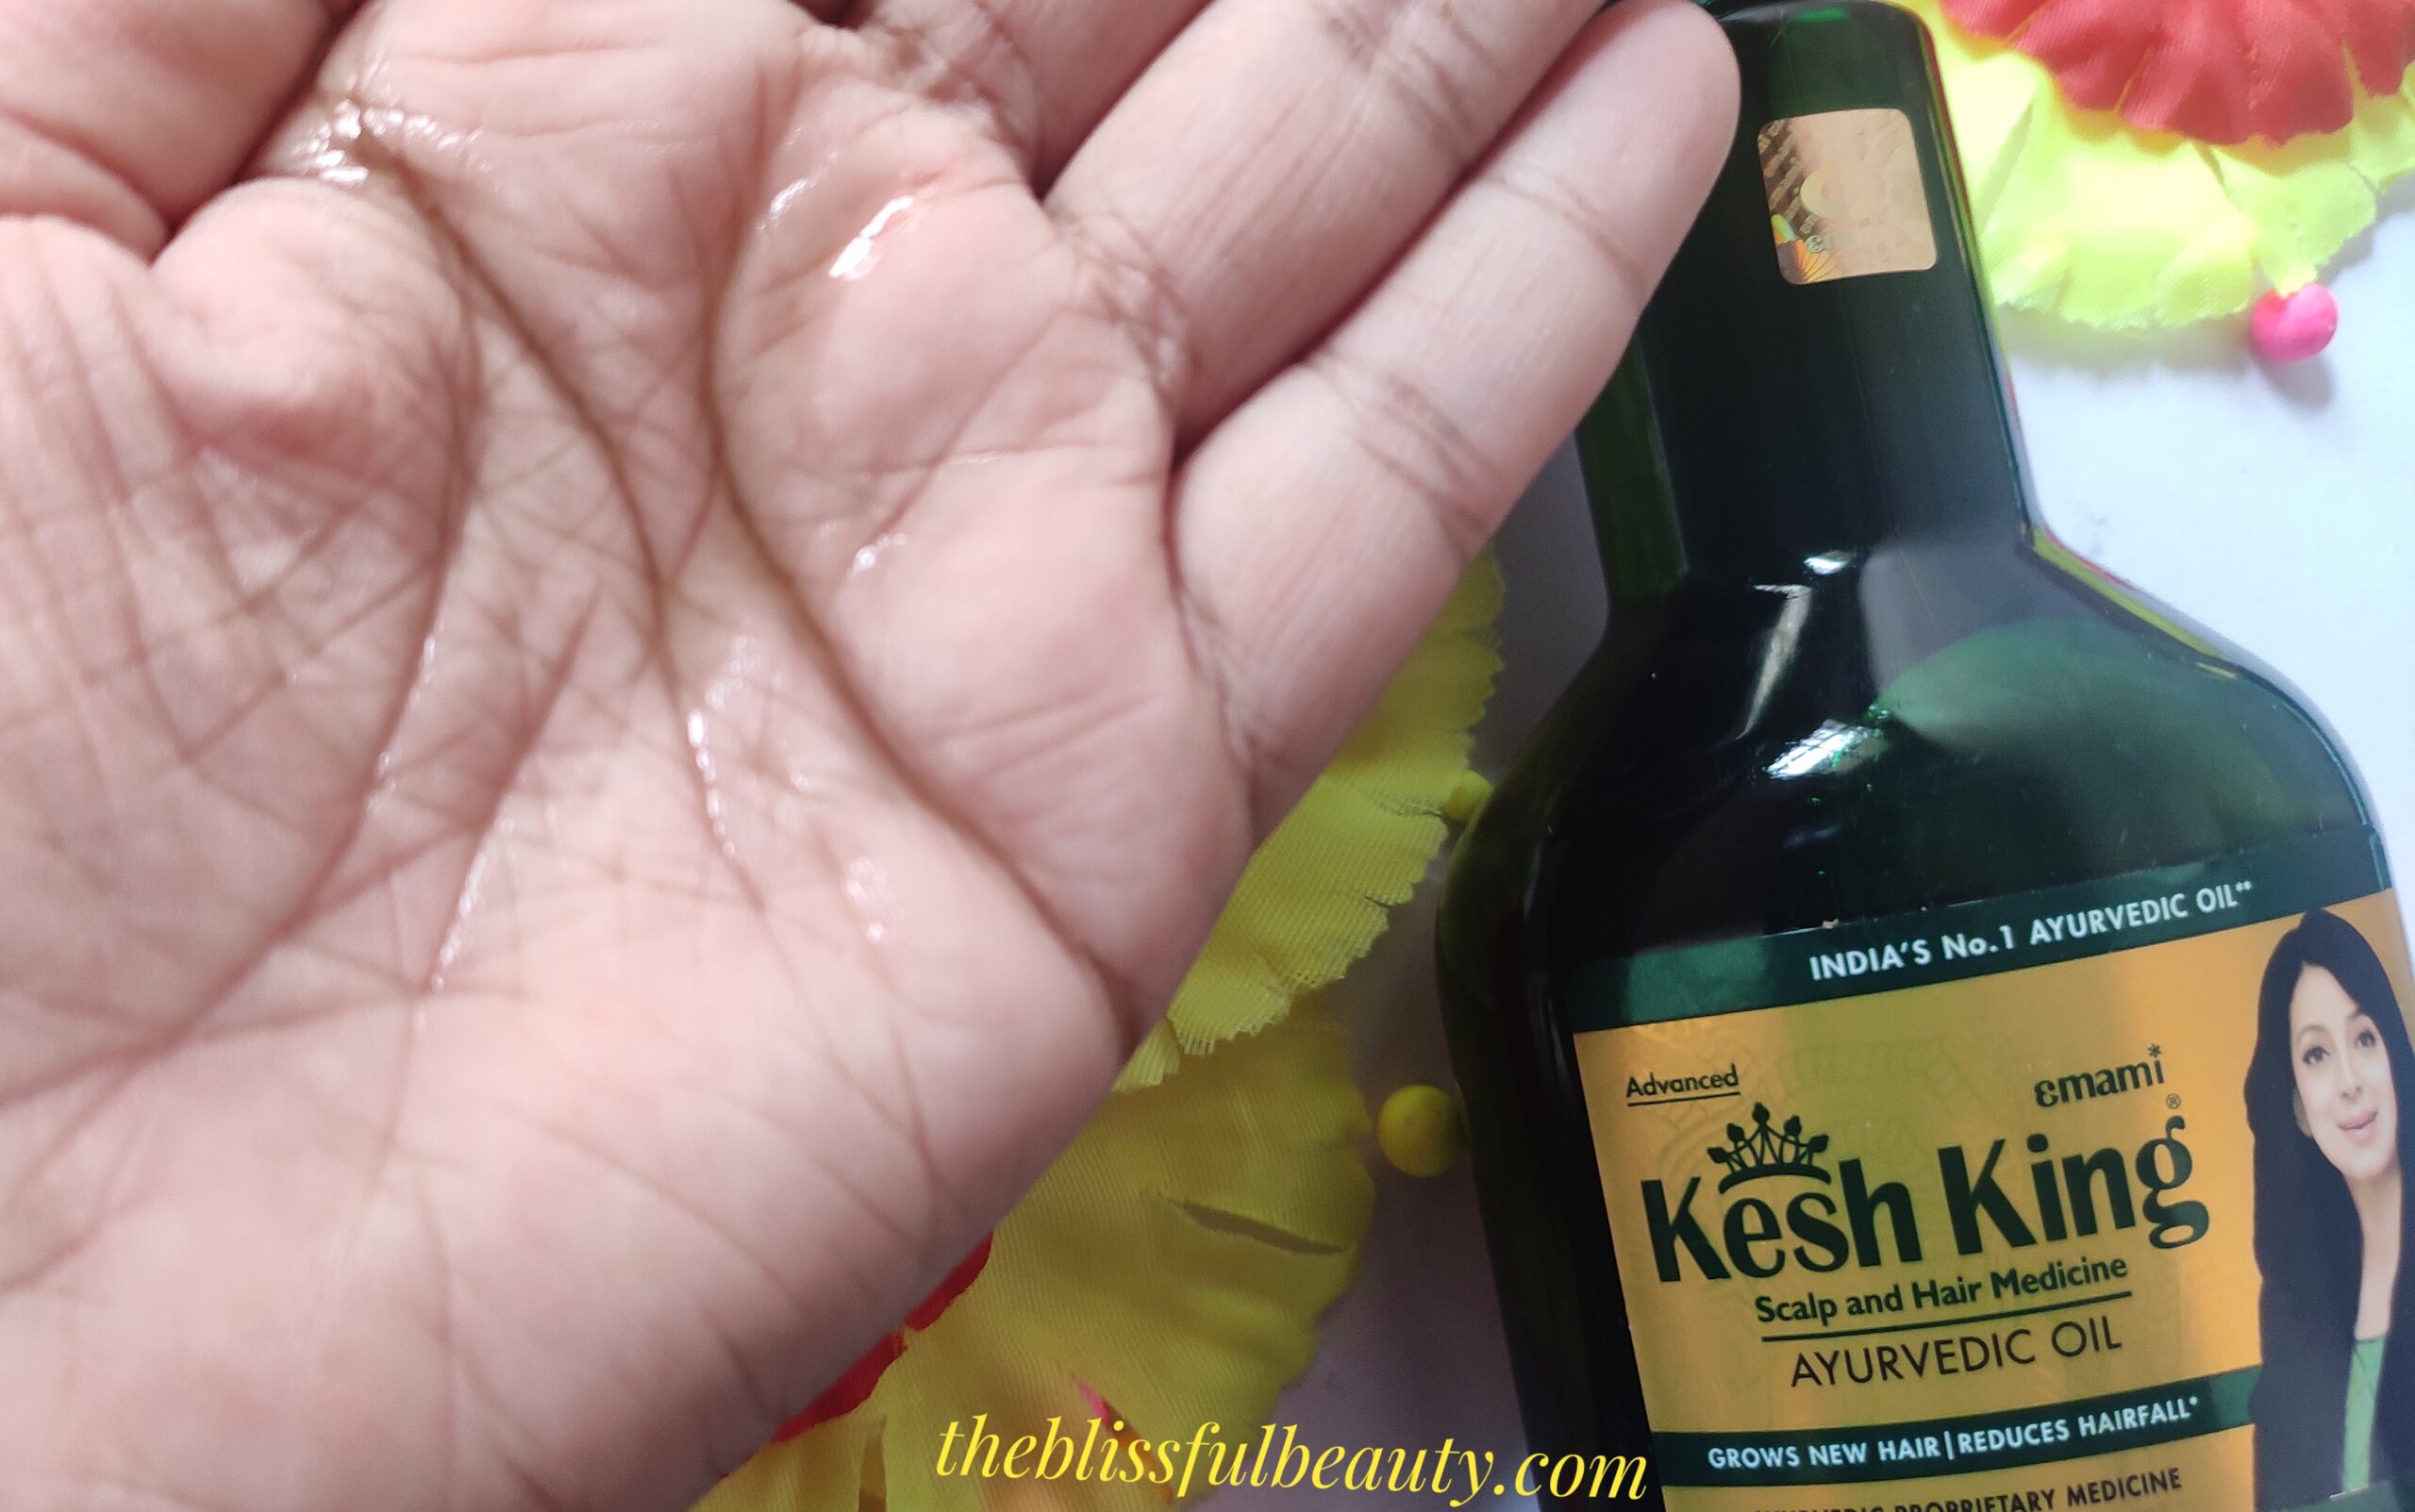 Kesh king Products Review:Hair oil|Shampoo|Conditioner